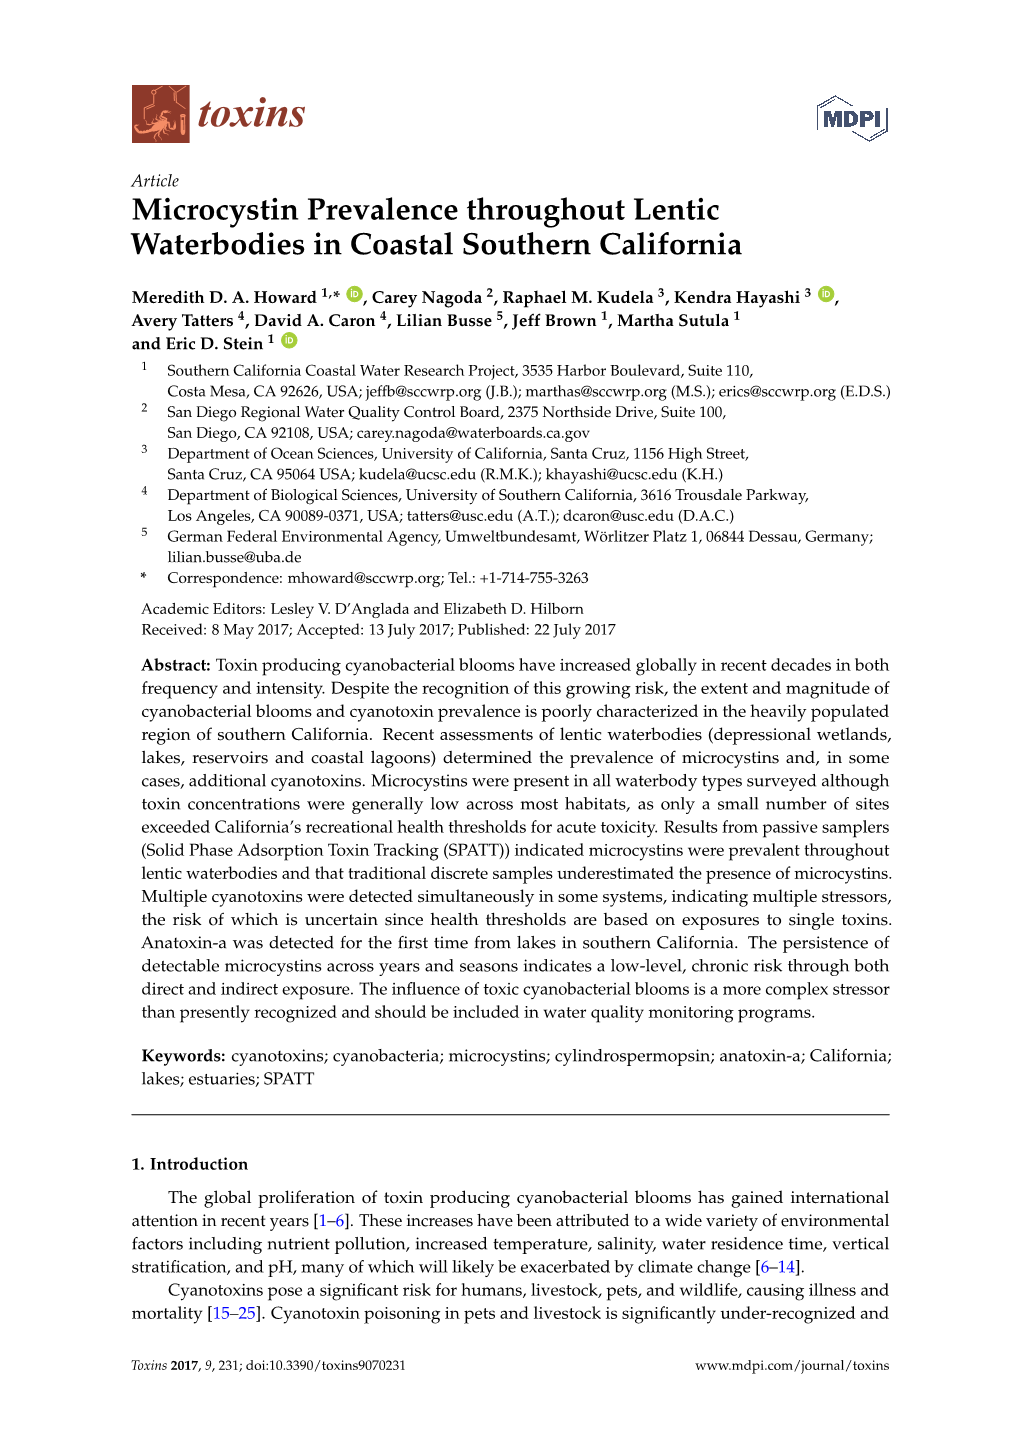 Microcystin Prevalence Throughout Lentic Waterbodies in Coastal Southern California